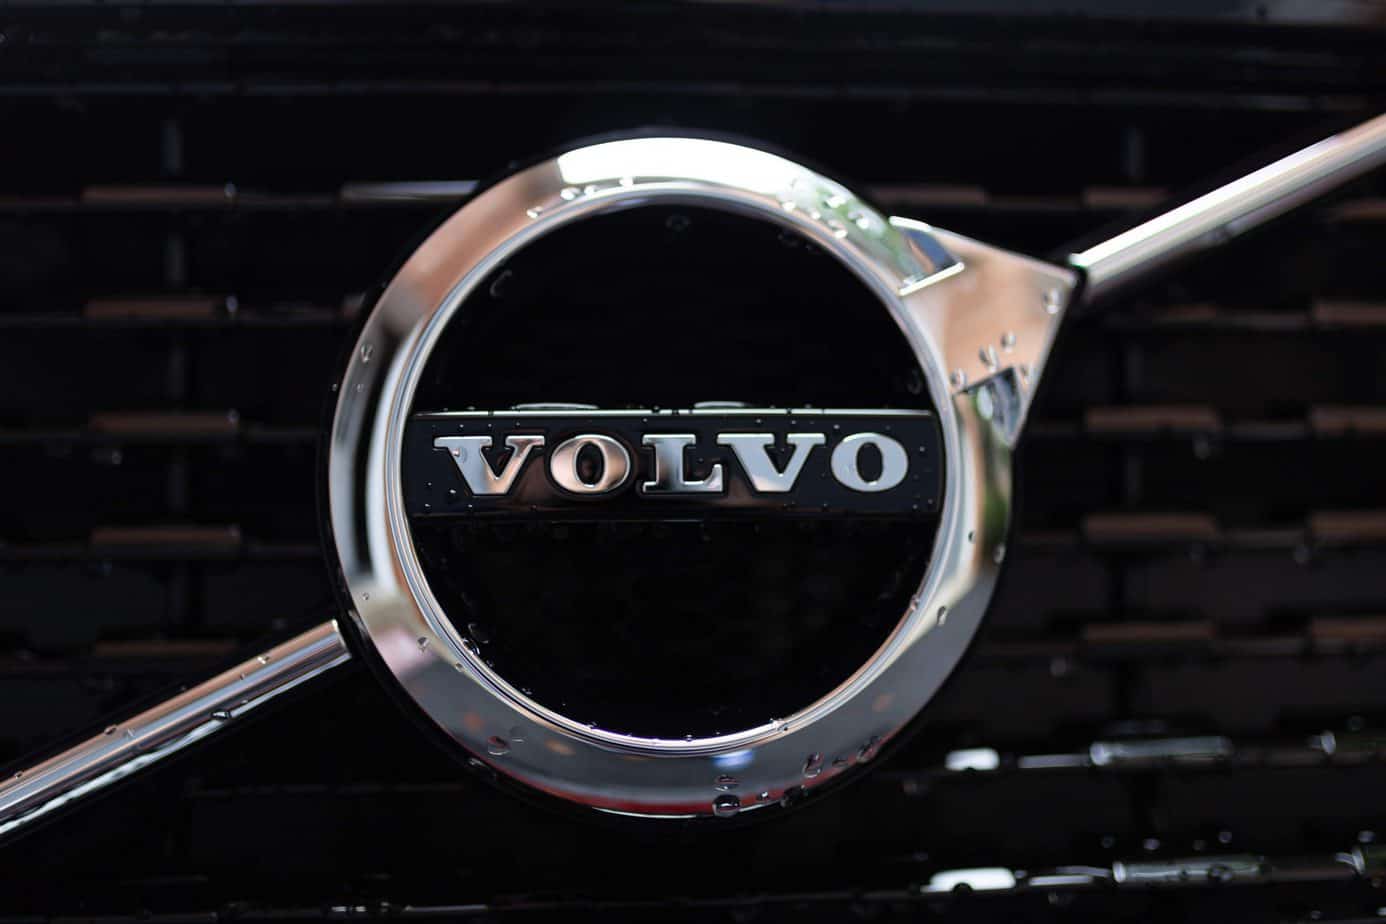 Has Volvo made a positive impact on safety when traveling with children?